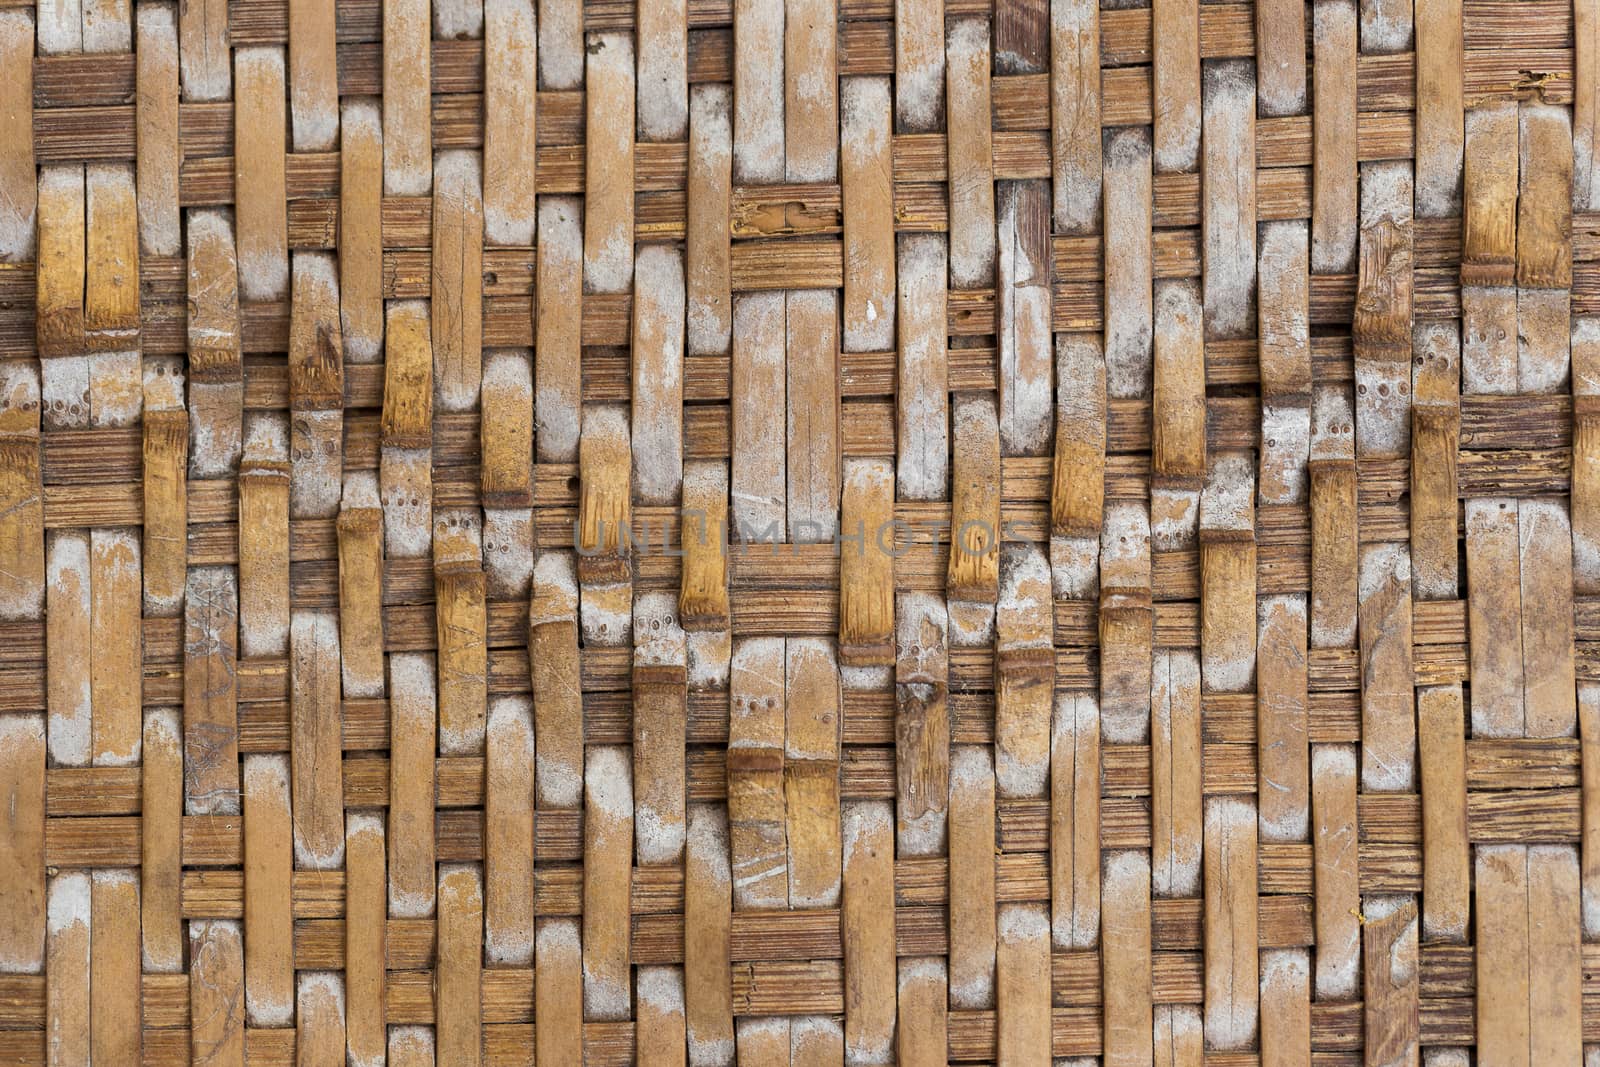 Retro bamboo weave pattern texture background.